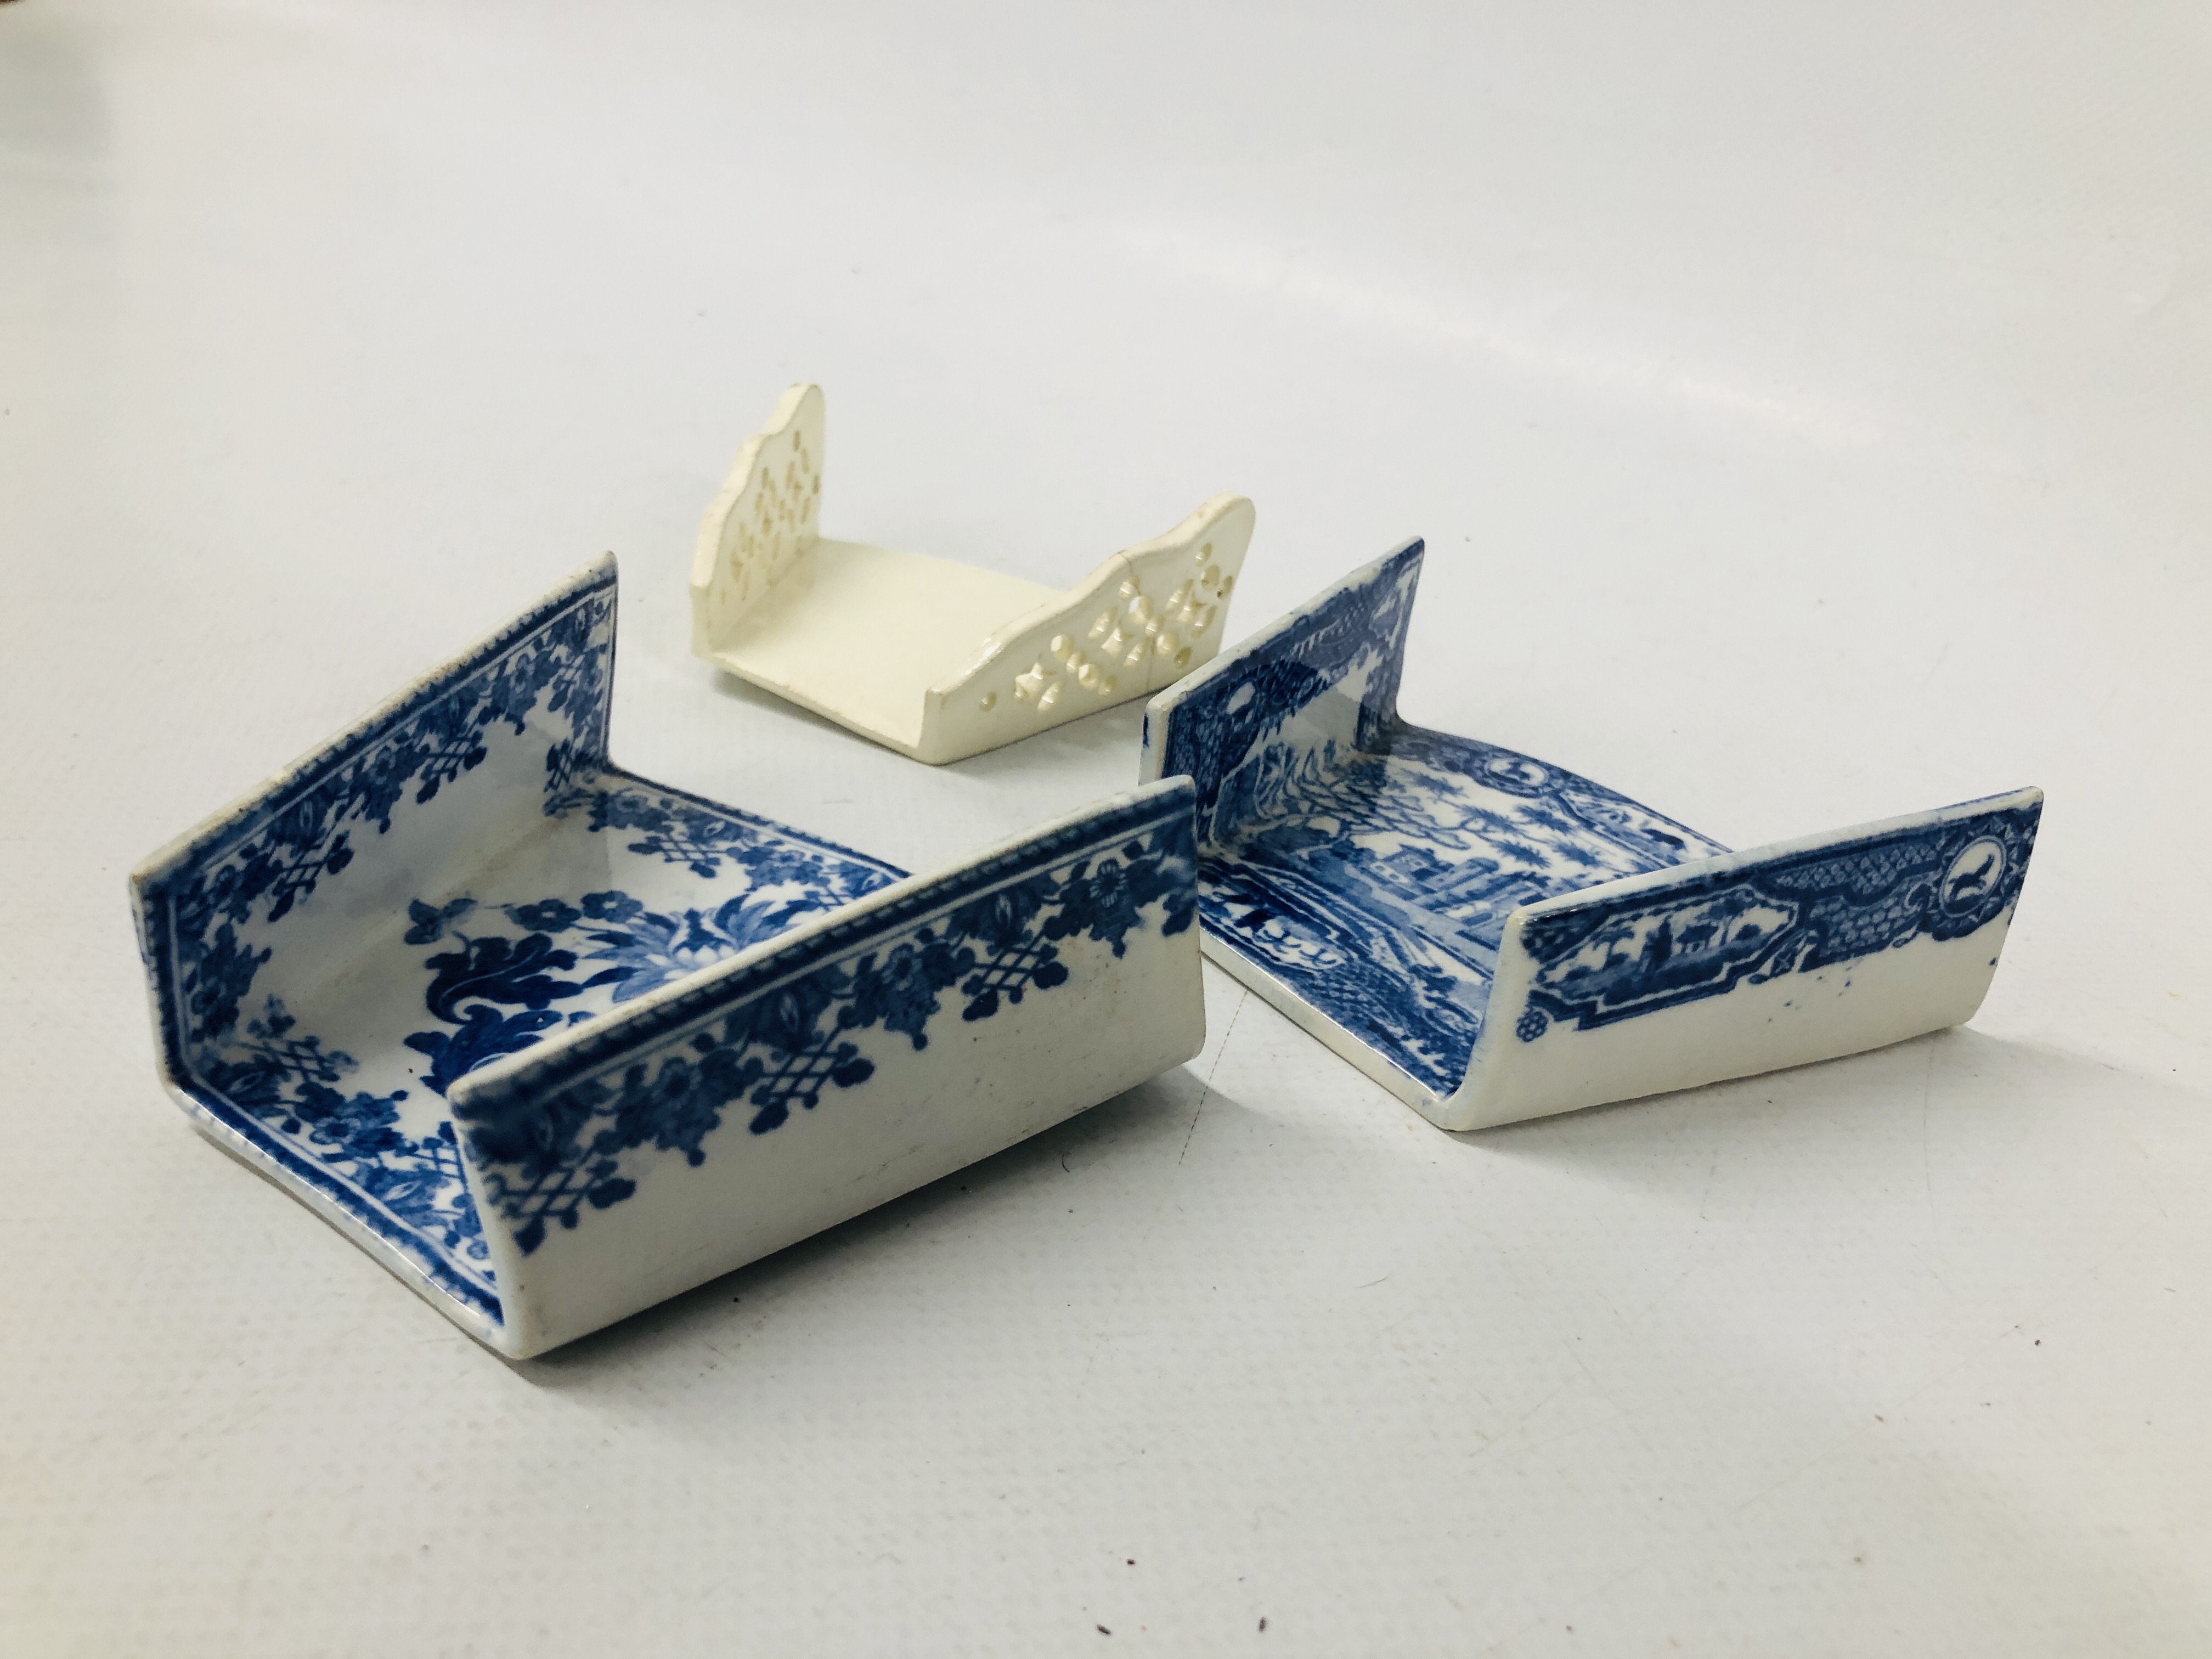 TWO SPODE BLUE AND WHITE ASPARAGUS SERVERS, ONE PRINTED WITH FLOWERS AND MARKED SPODE, - Image 3 of 4